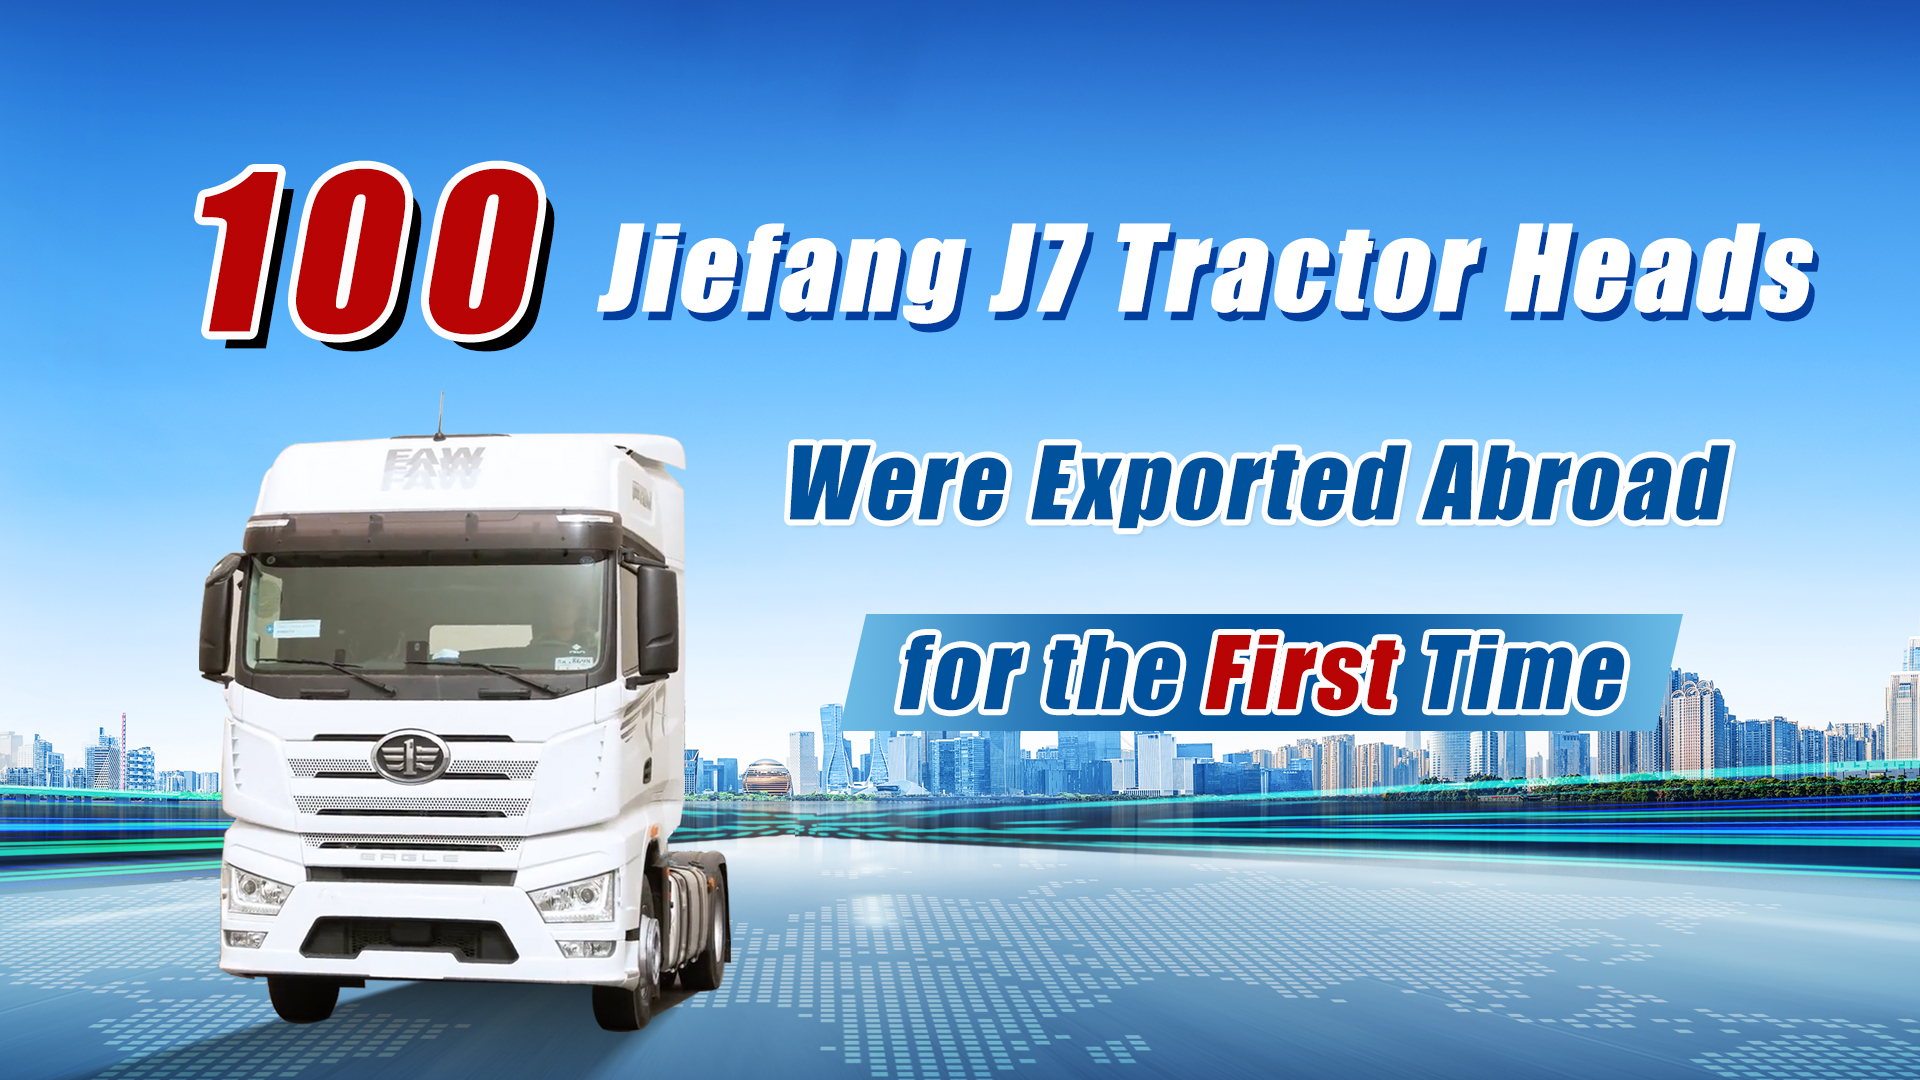 100 Jiefang J7 Tractor Heads Were Exported Abroad for the First Time